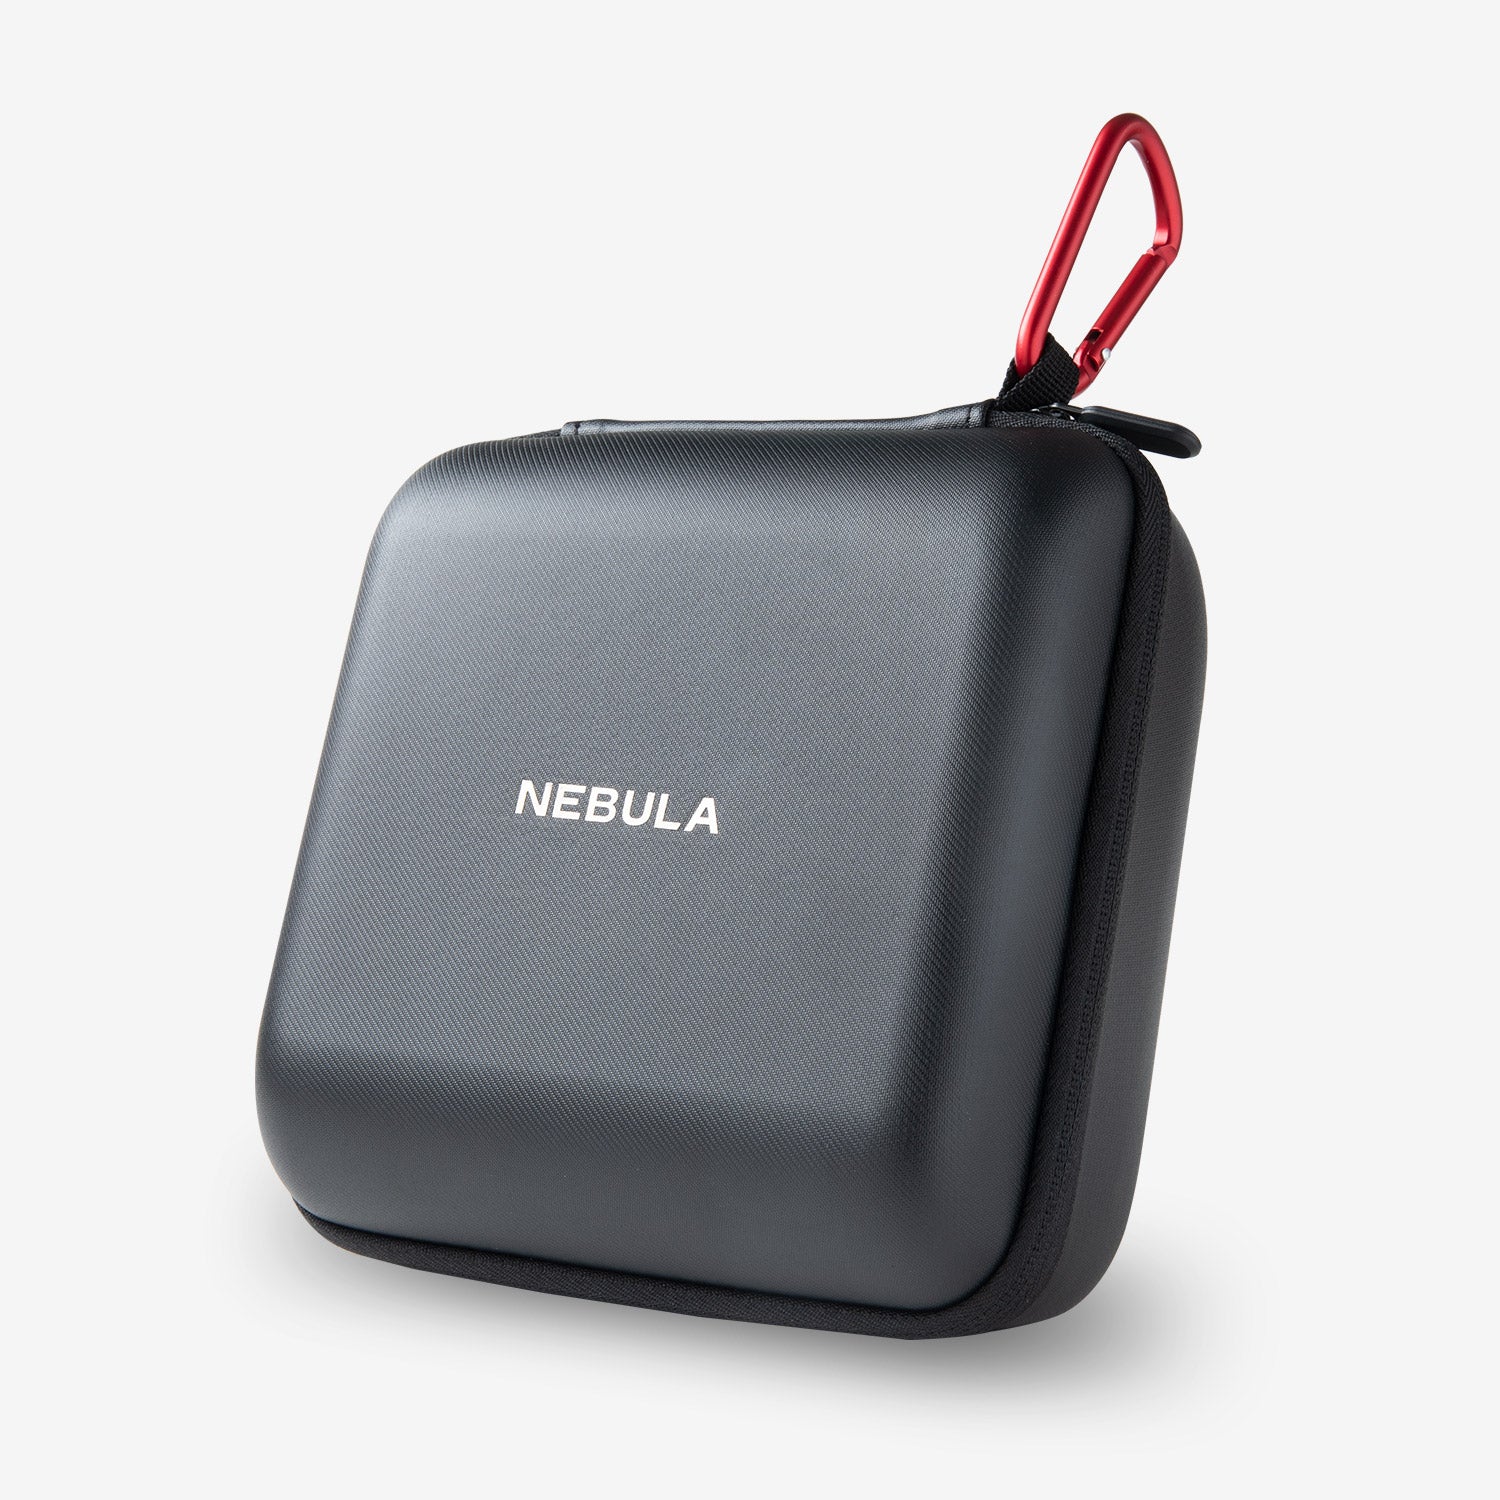 Easy-to-Use | Nebula Accessories